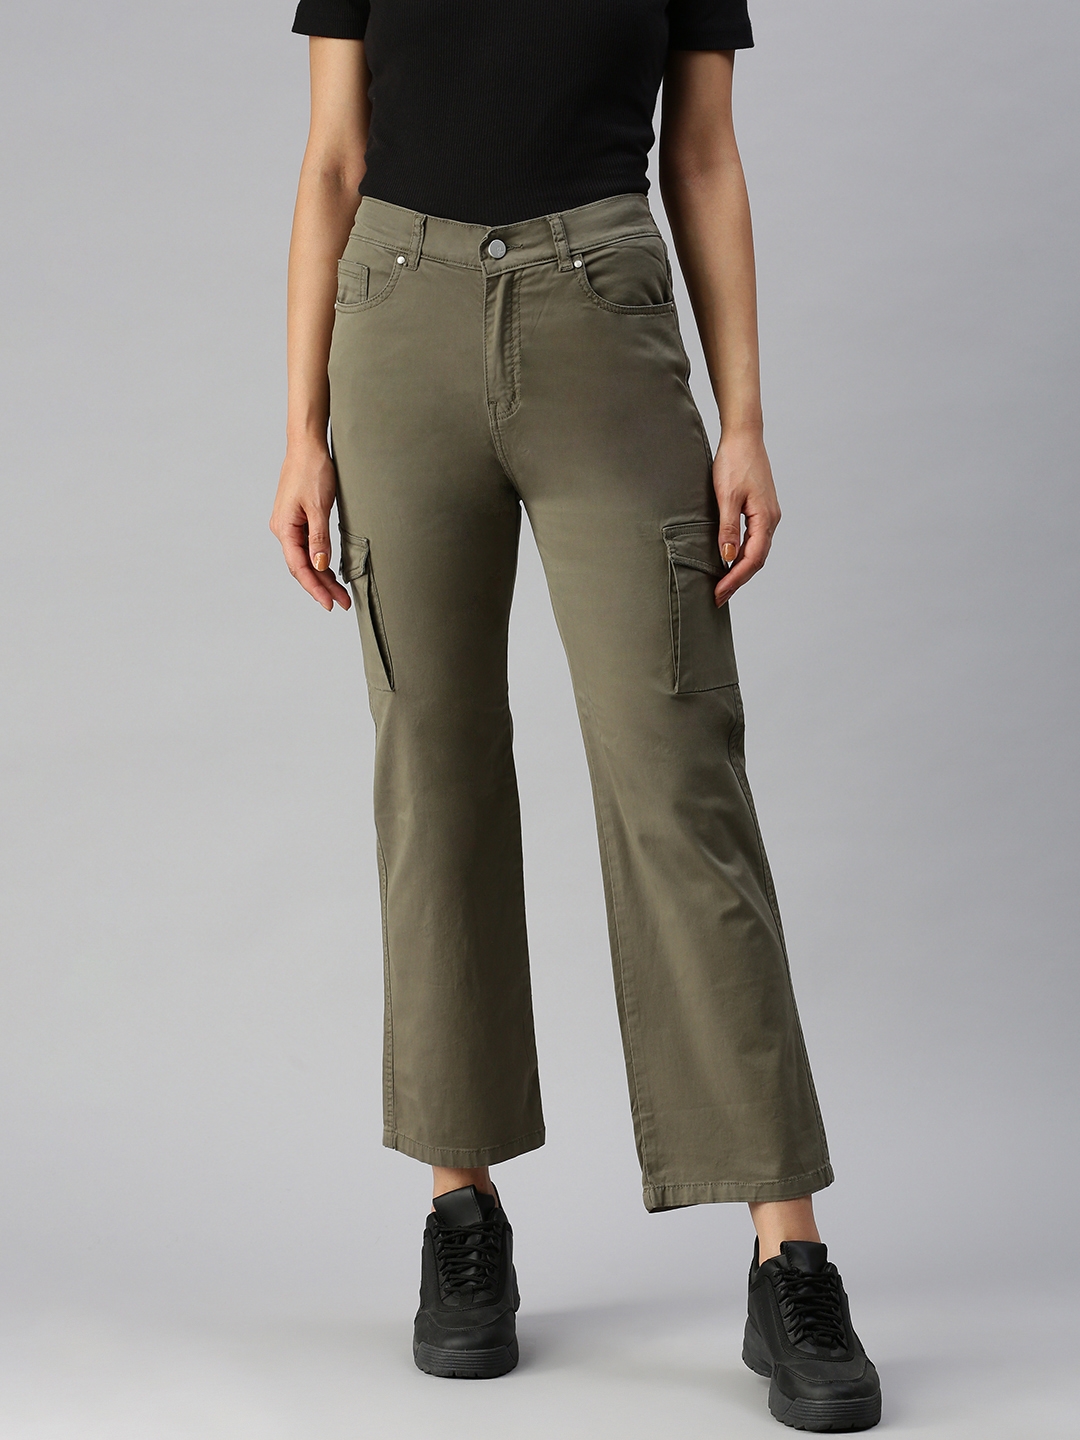 SHOWOFF Women's Clean Look High-Rise Olive Straight Fit Jeans